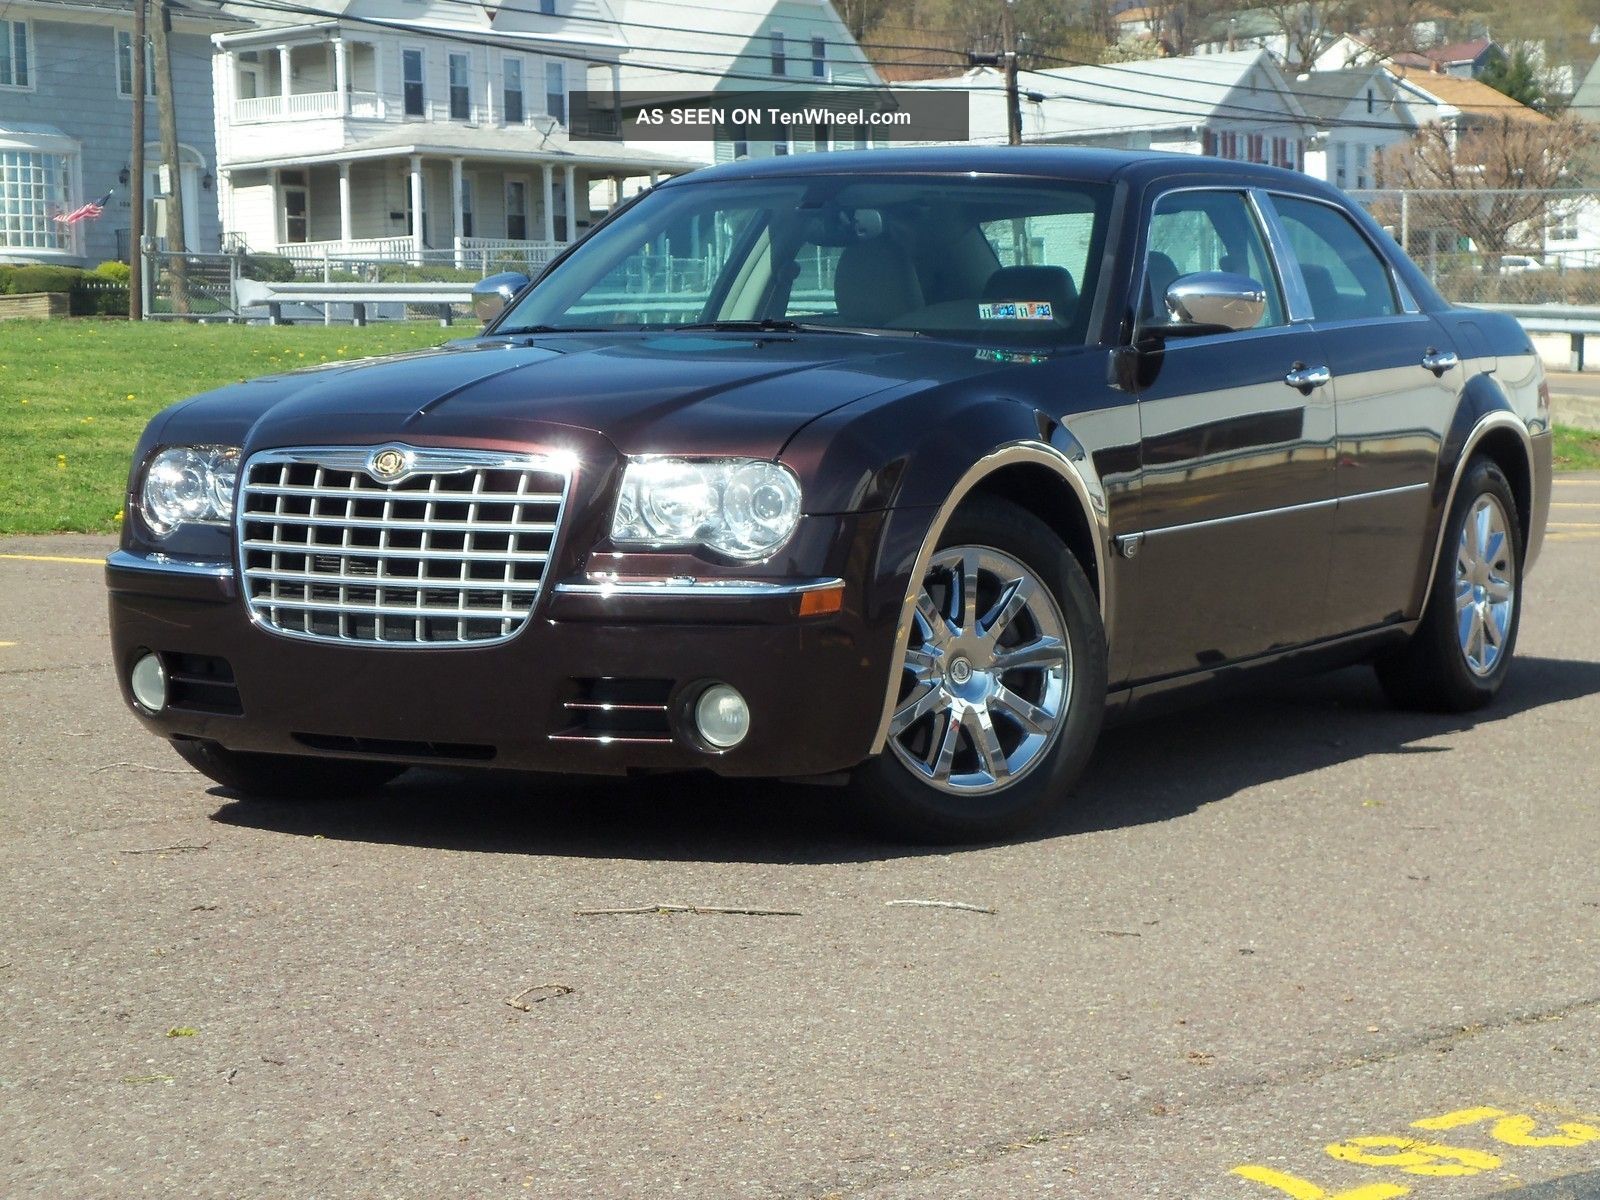 2005 Chrysler 300 C 0 60 Times Top Speed Specs Quarter Mile And